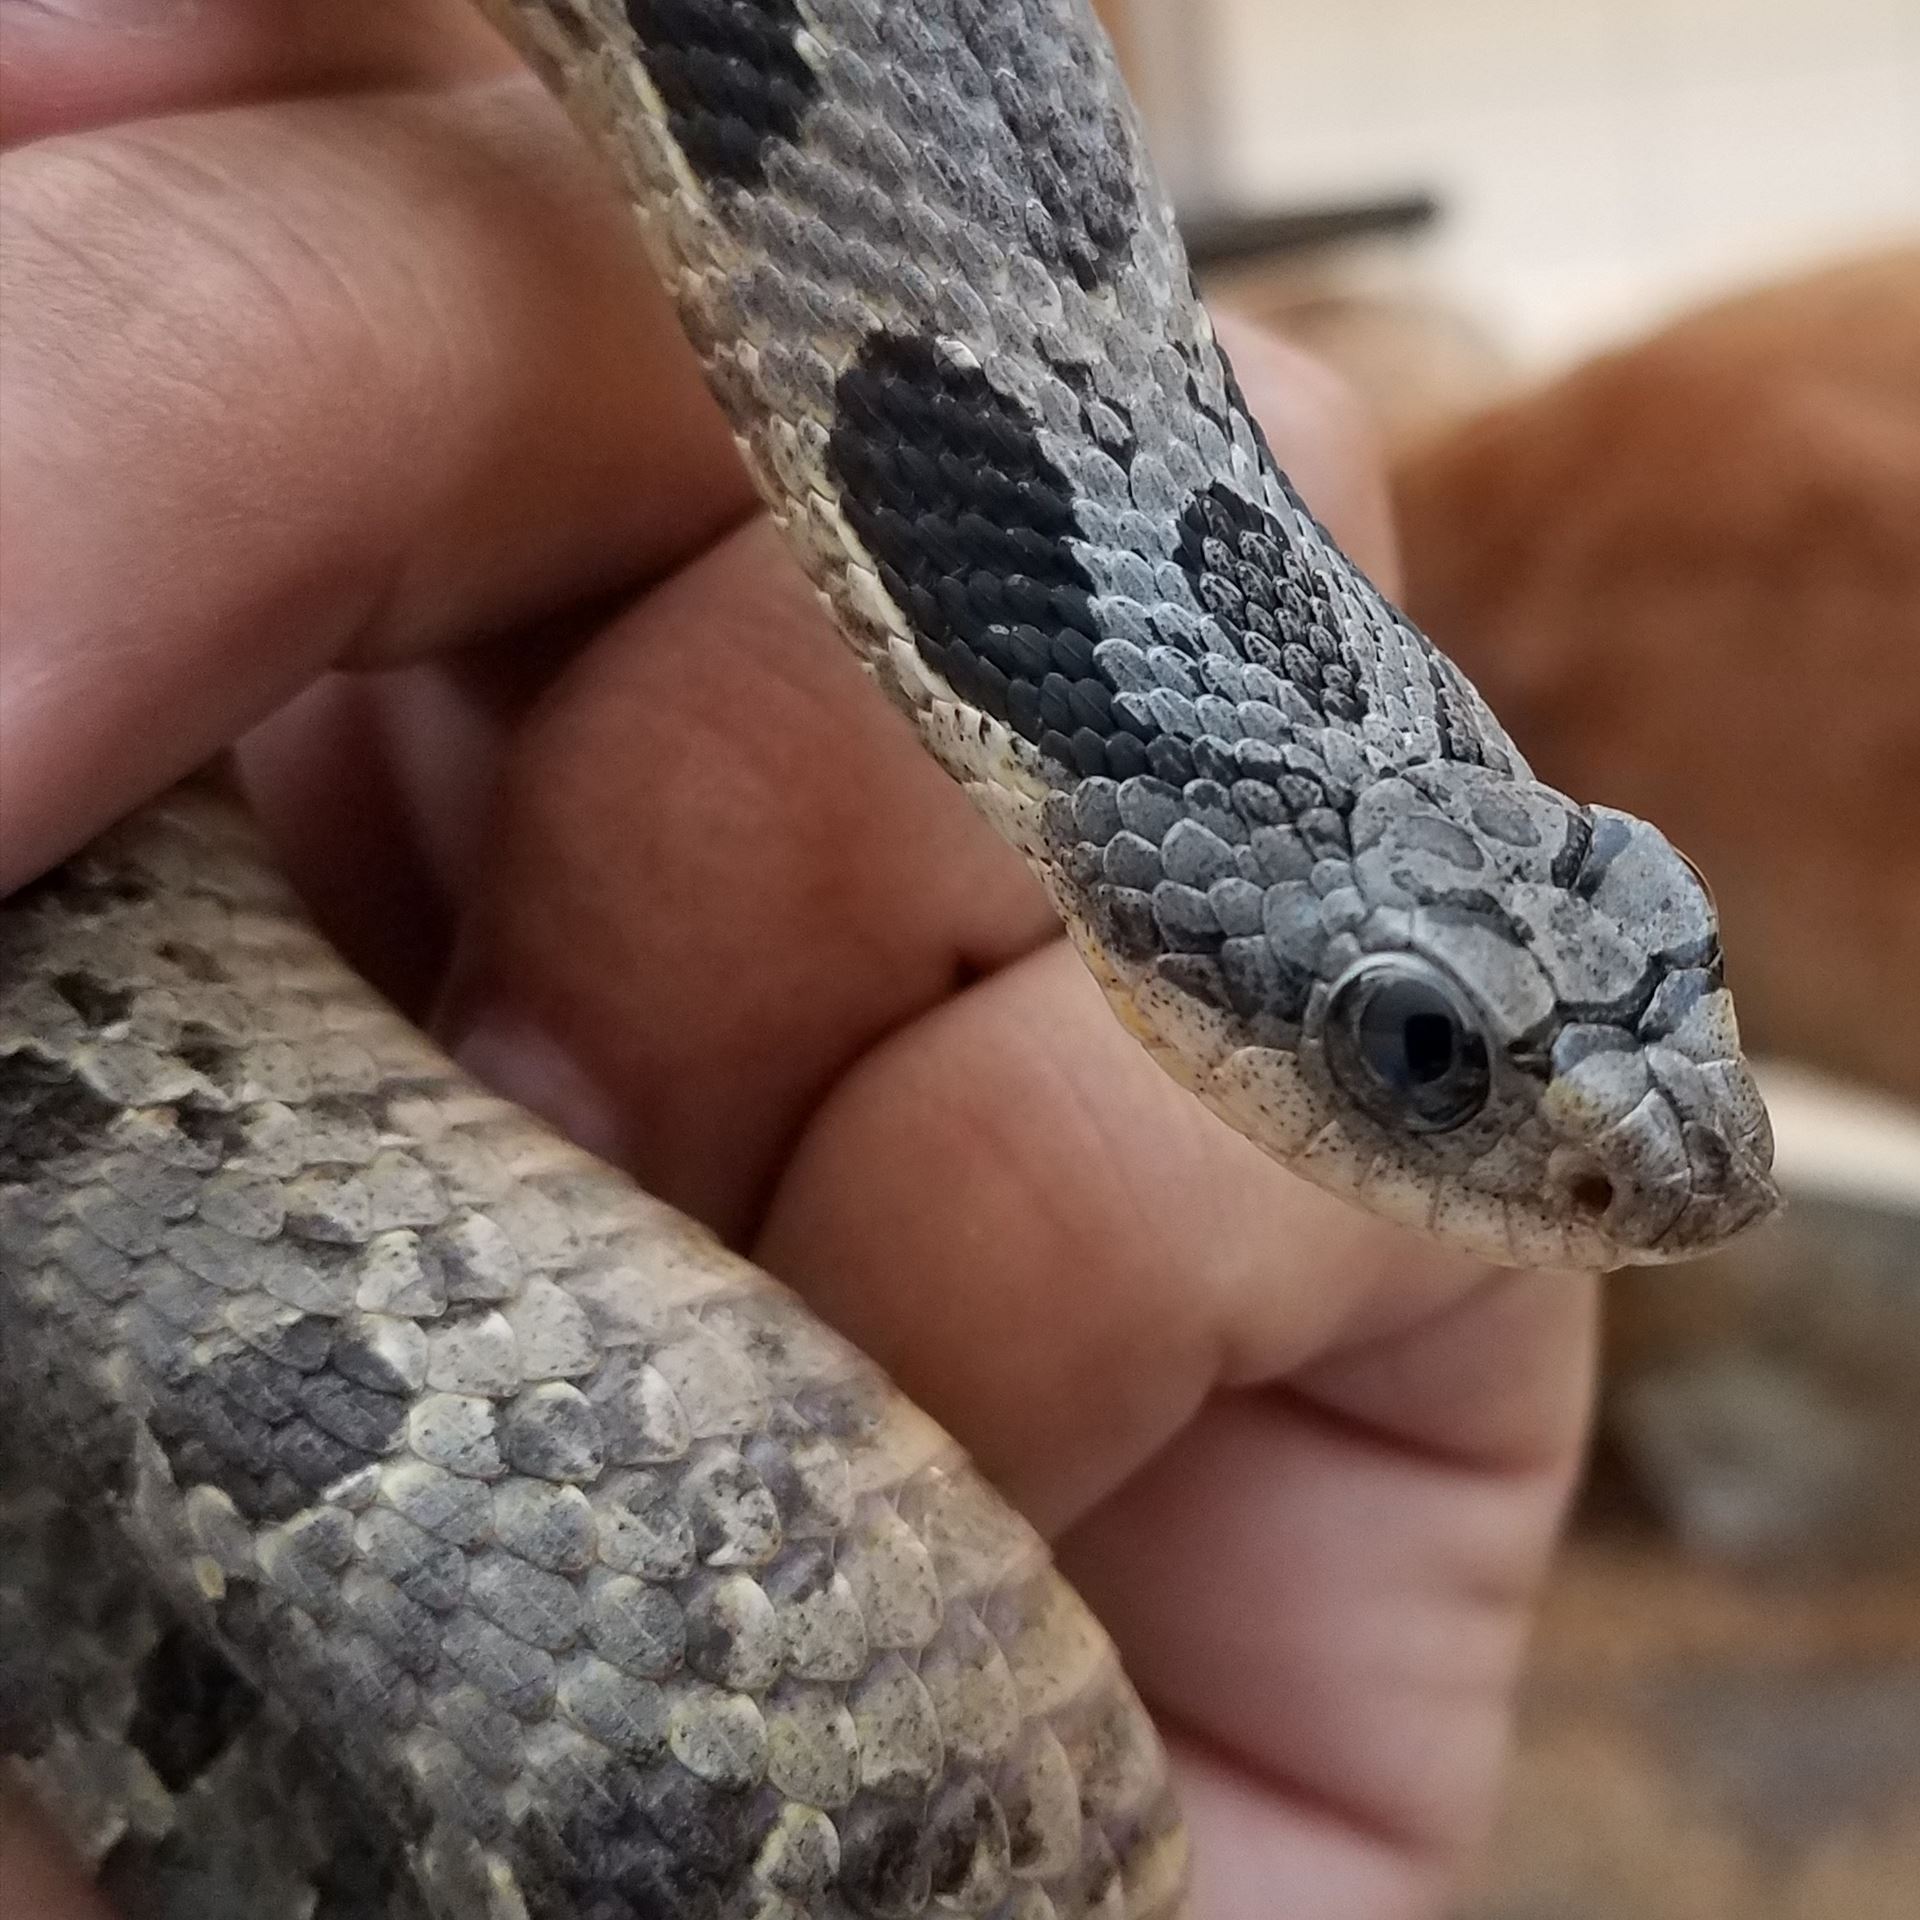 pine snake at event